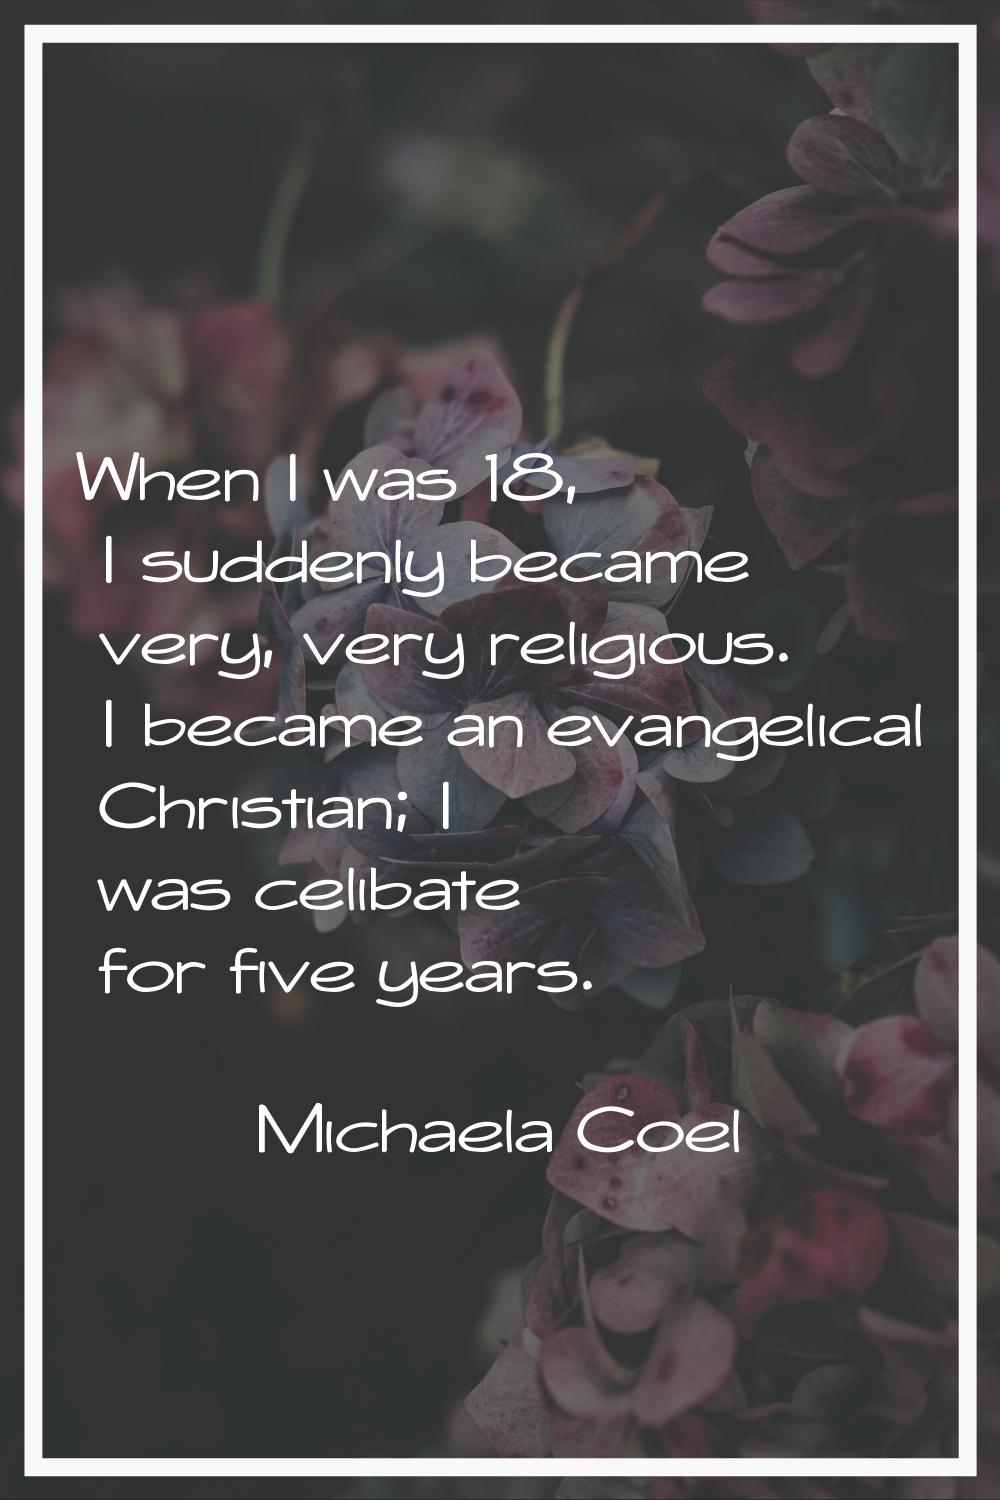 When I was 18, I suddenly became very, very religious. I became an evangelical Christian; I was cel